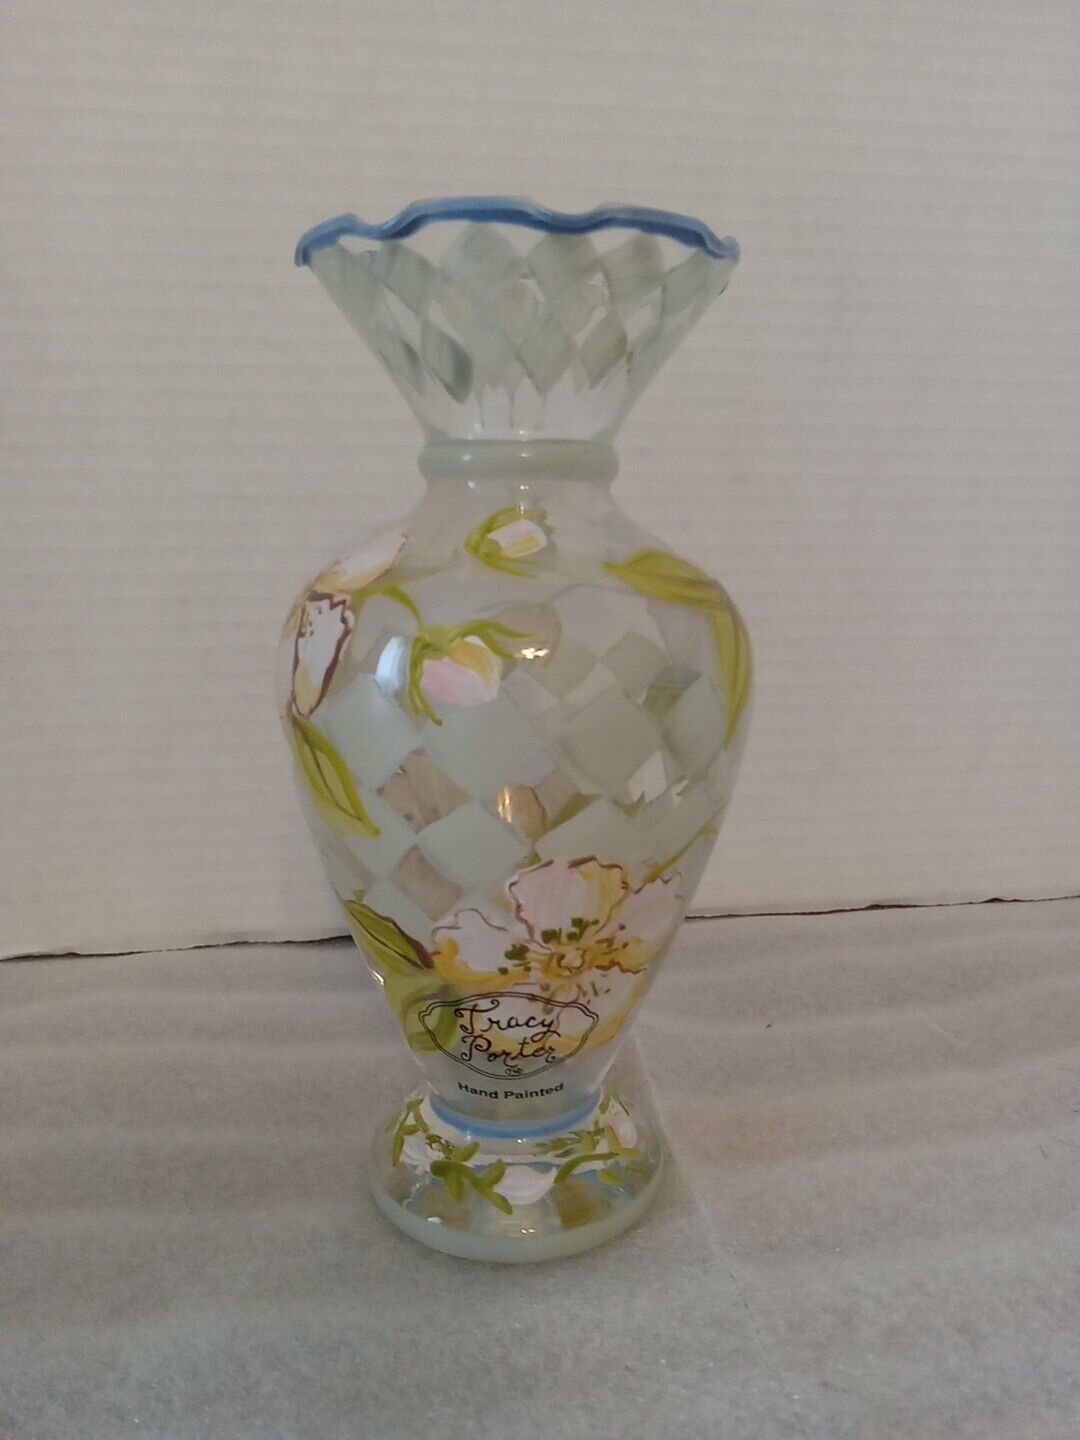 Tracy Porter Hand Painted Floral Bud Vase Ruffled Rim.